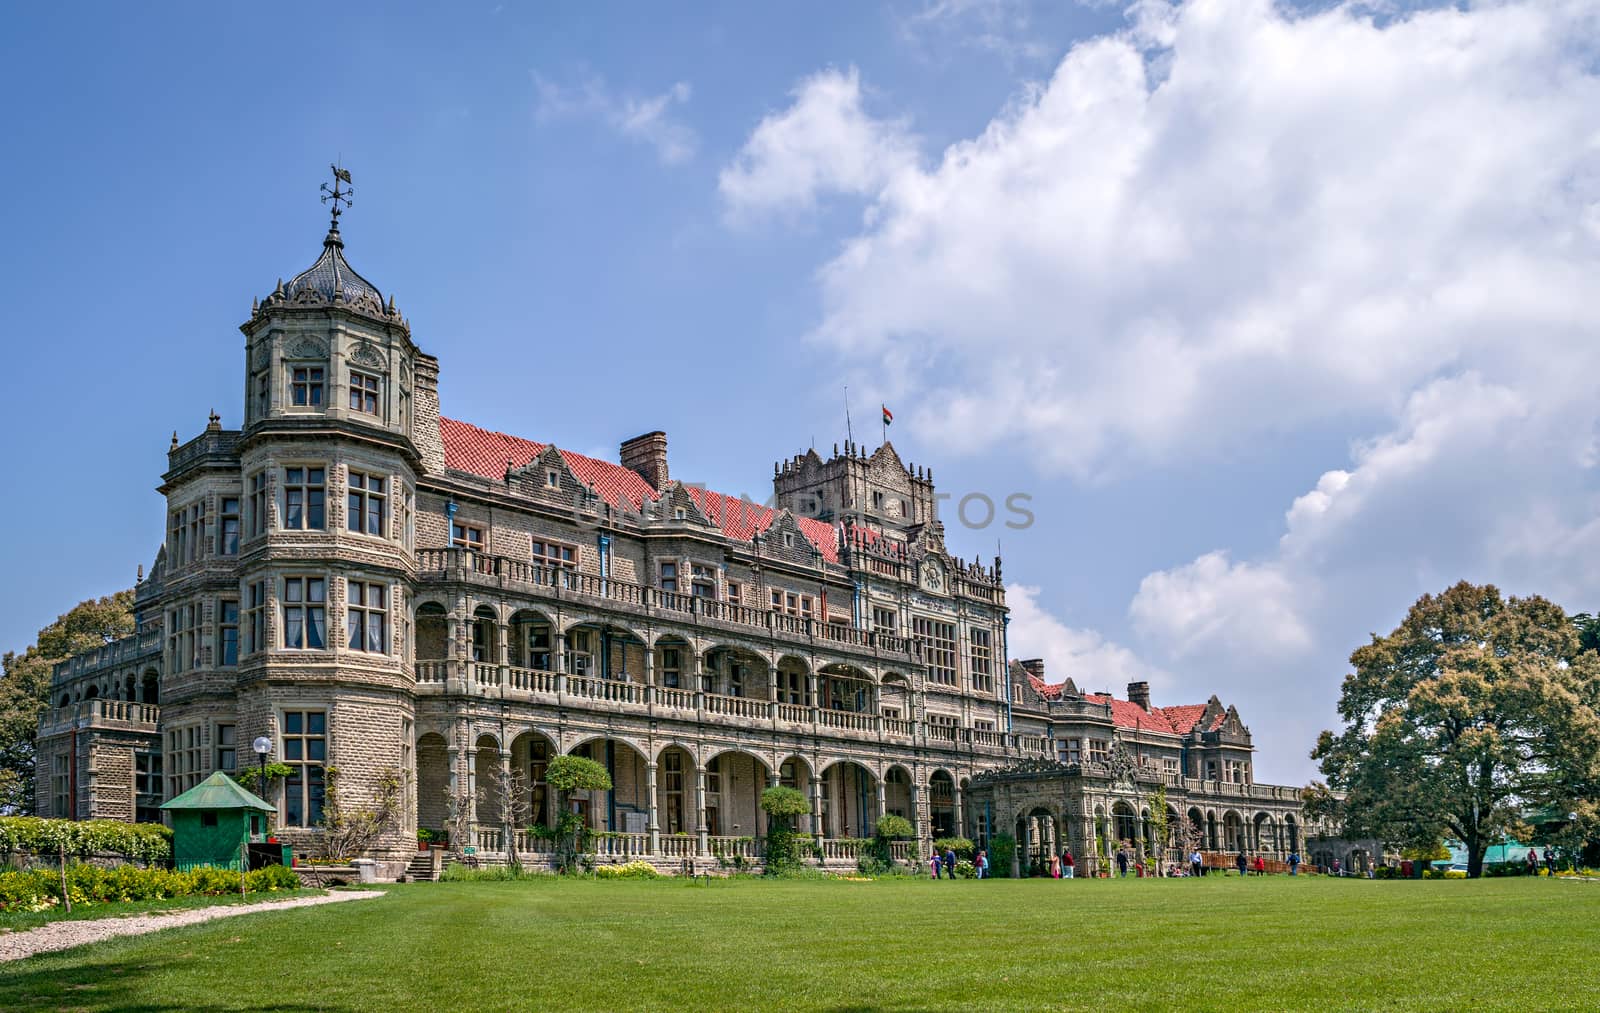 Former residence of the British Viceroy of India - Viceregal Lodge. It is also known as Rastrapati bhavan. Place of tourists attraction.